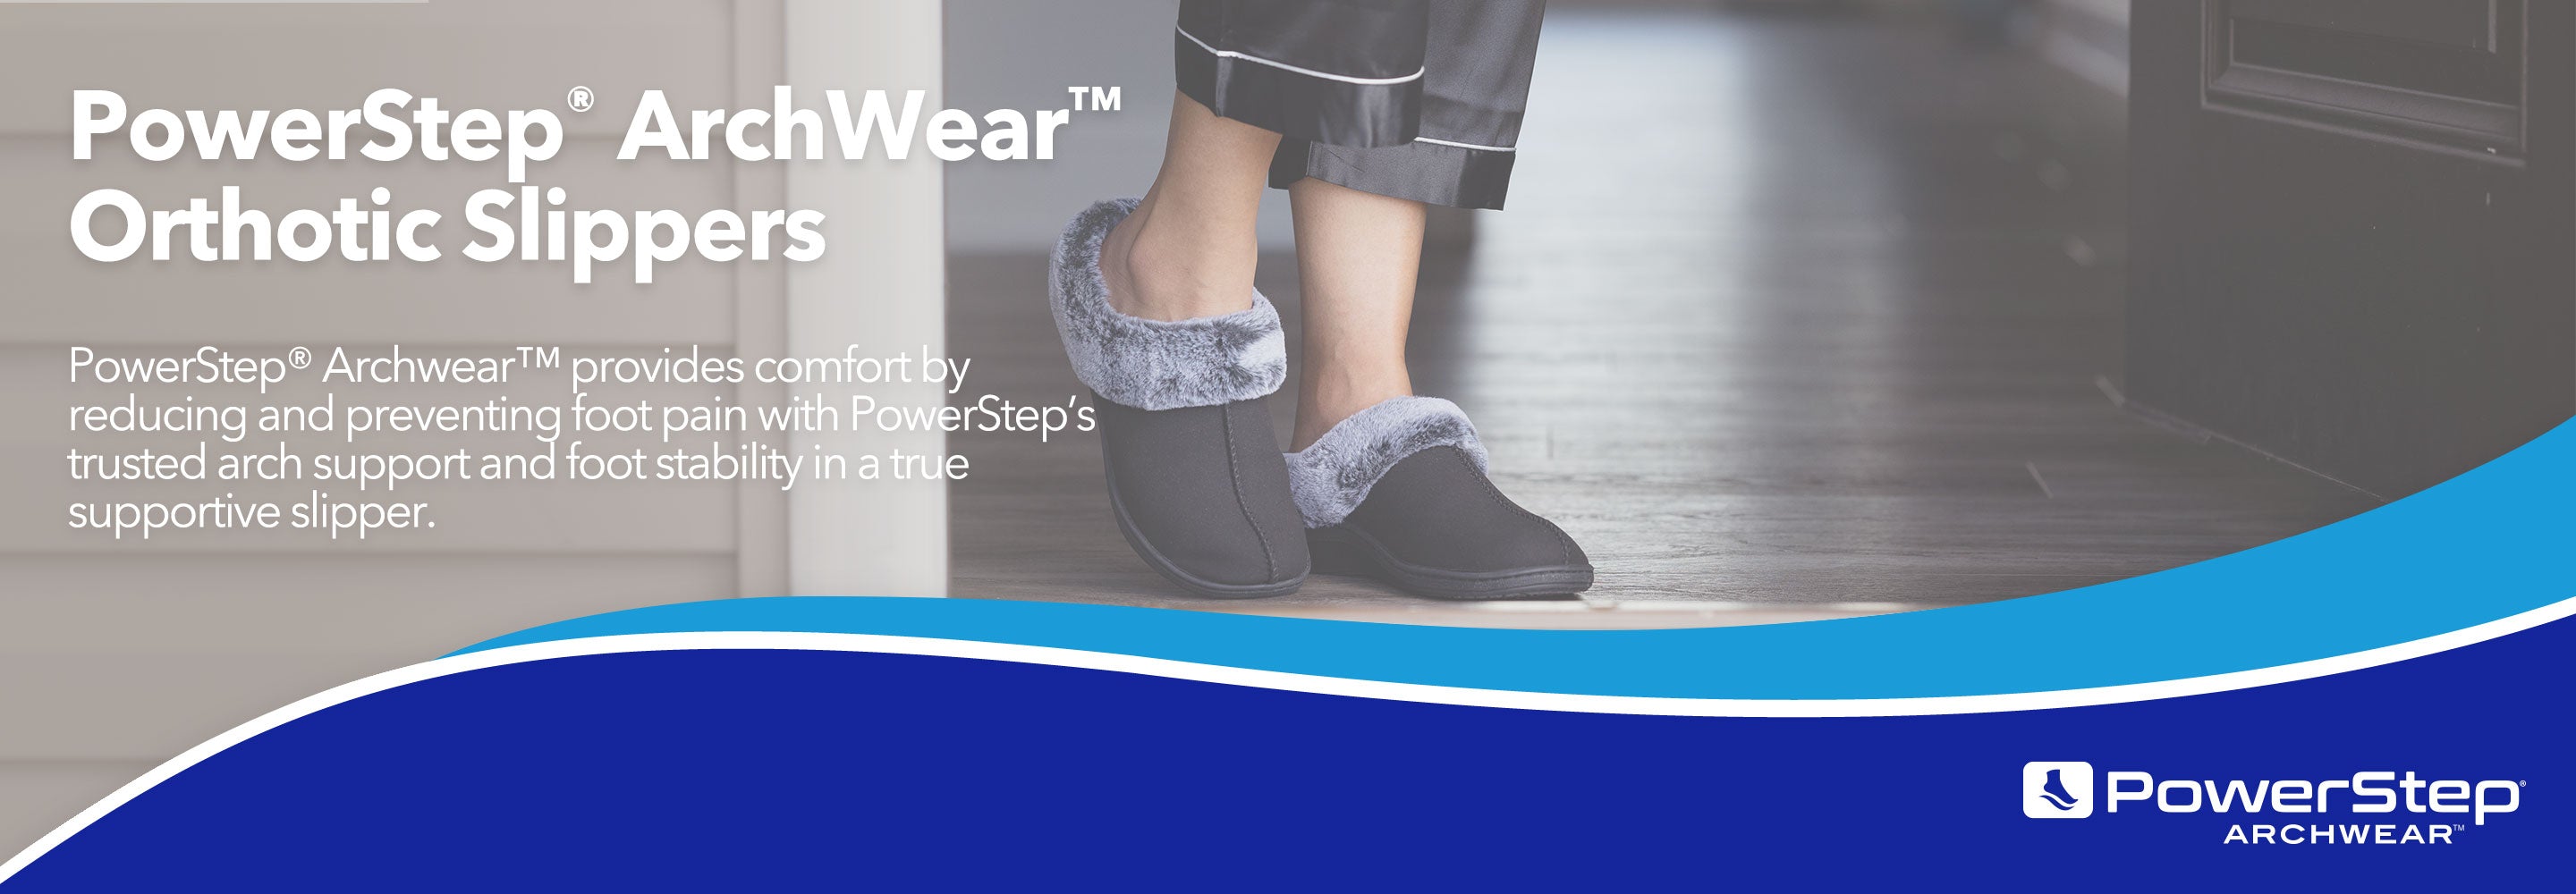 PowerStep ArchWear Orthotic Slippers: PowerStep ArchWear providies comfort by reducing and preventing foot pain with PowerStep's trusted arch support and foot stability in a true supportive slipper.